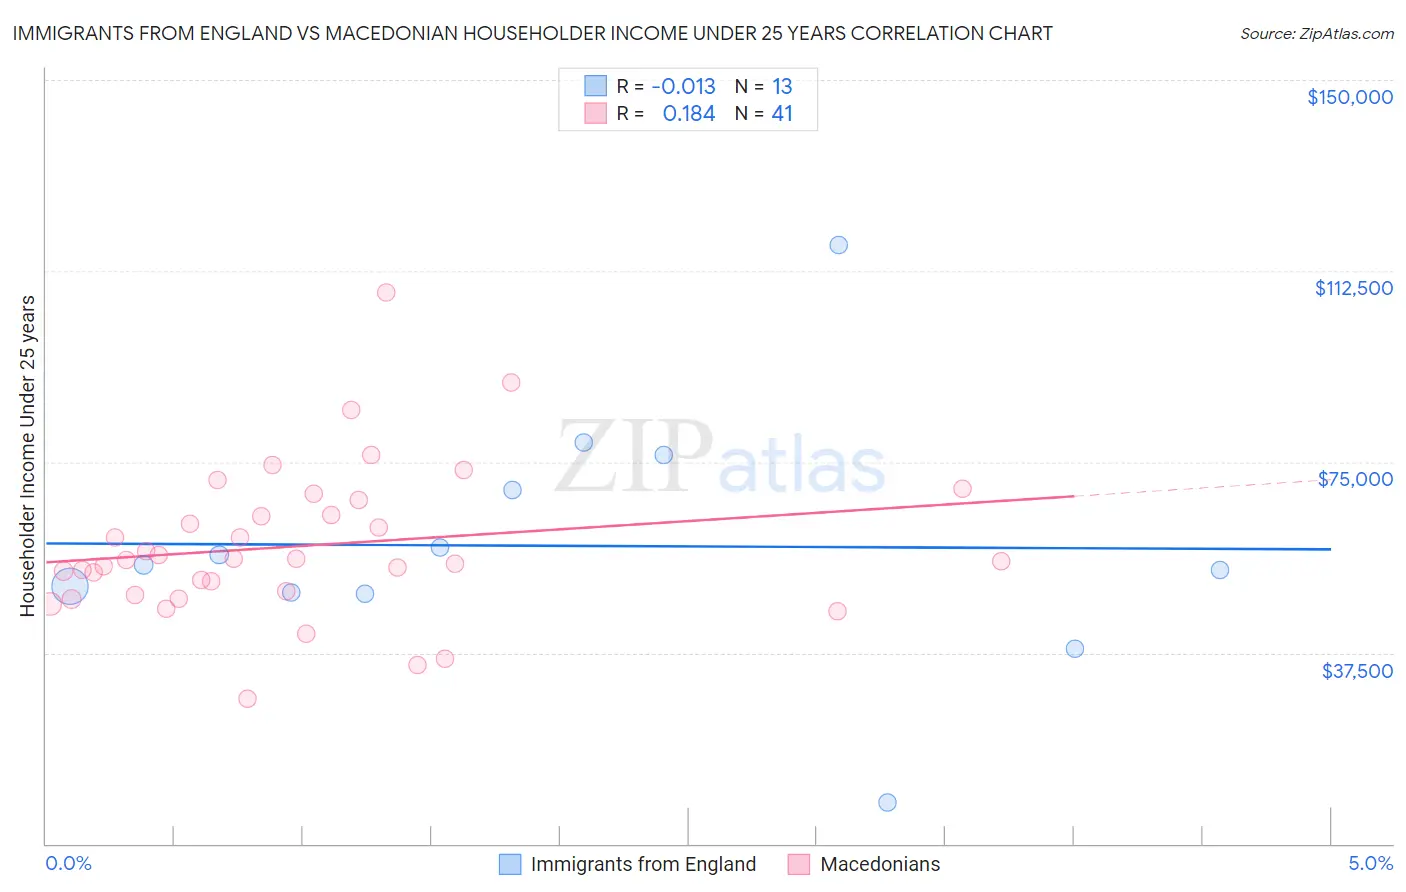 Immigrants from England vs Macedonian Householder Income Under 25 years